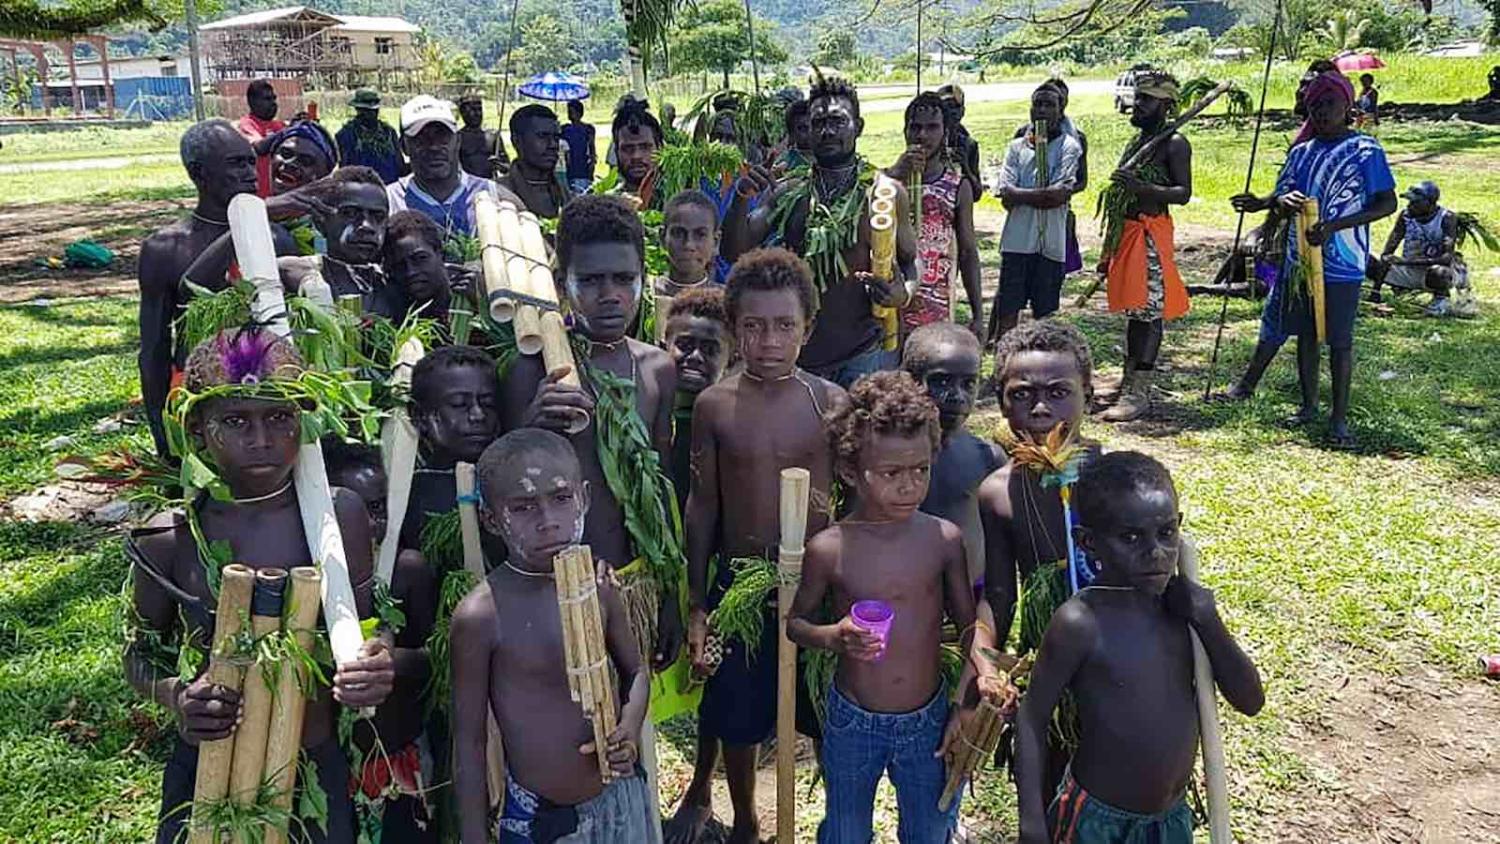 Children attend a reconciliation ceremony ahead of the independence referendum, Arawa, Bougainville, 6 November (Photo: Llane Munau/AFP via Getty Images)